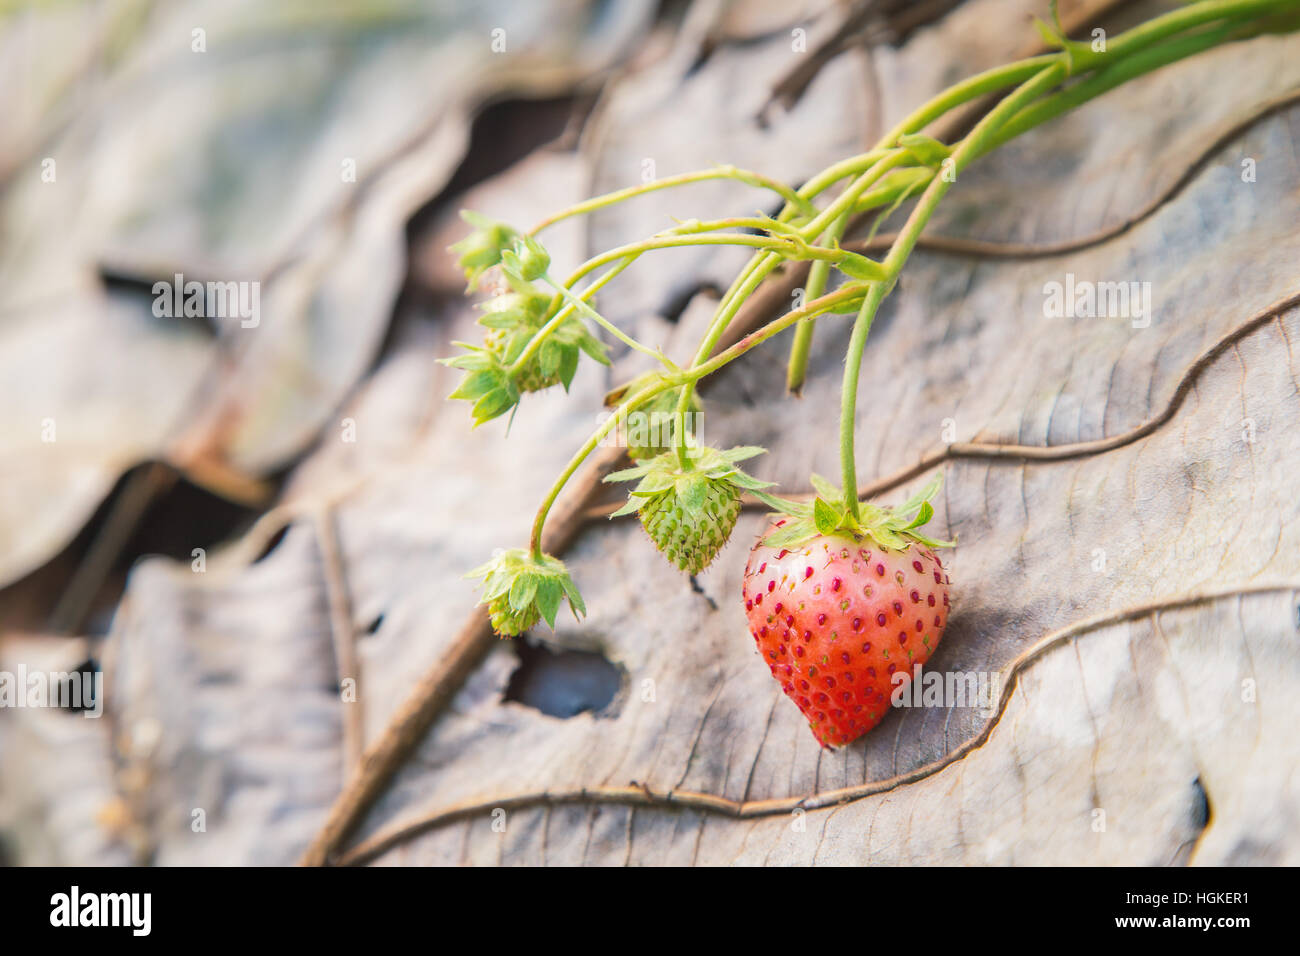 Close focus on small red and white garden strawberry on big brown leaf Stock Photo